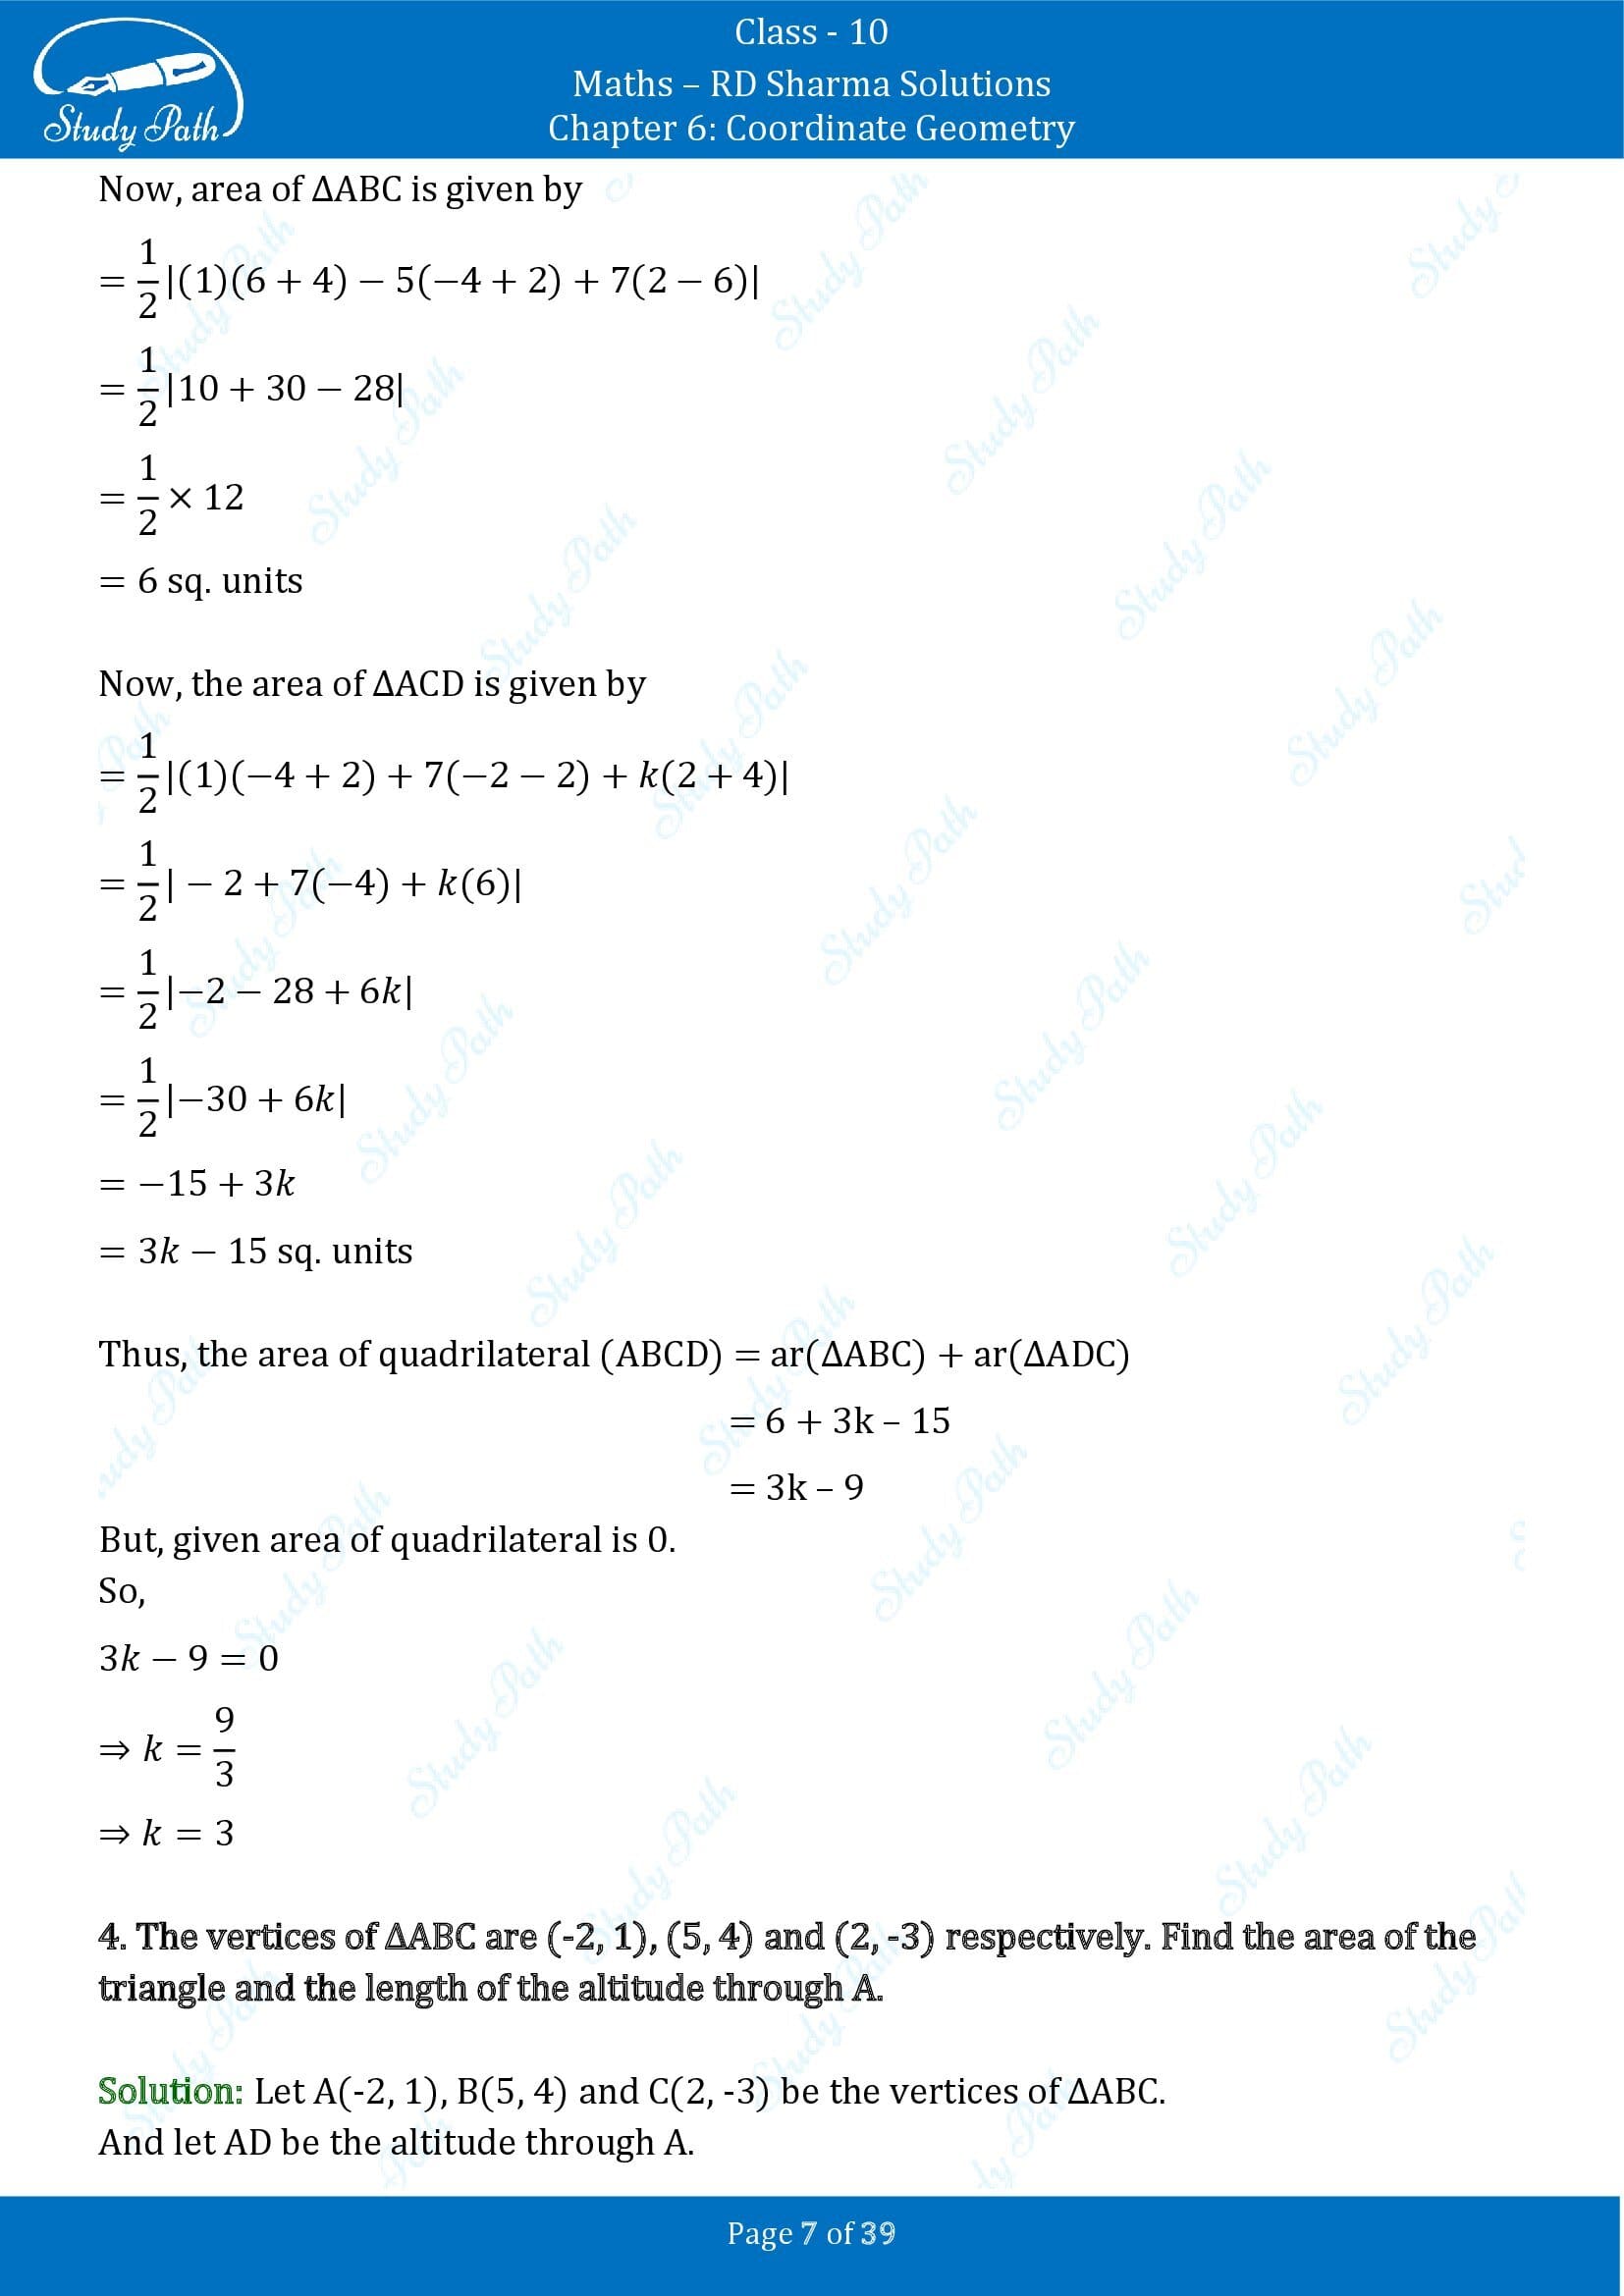 RD Sharma Solutions Class 10 Chapter 6 Coordinate Geometry Exercise 6.5 0007